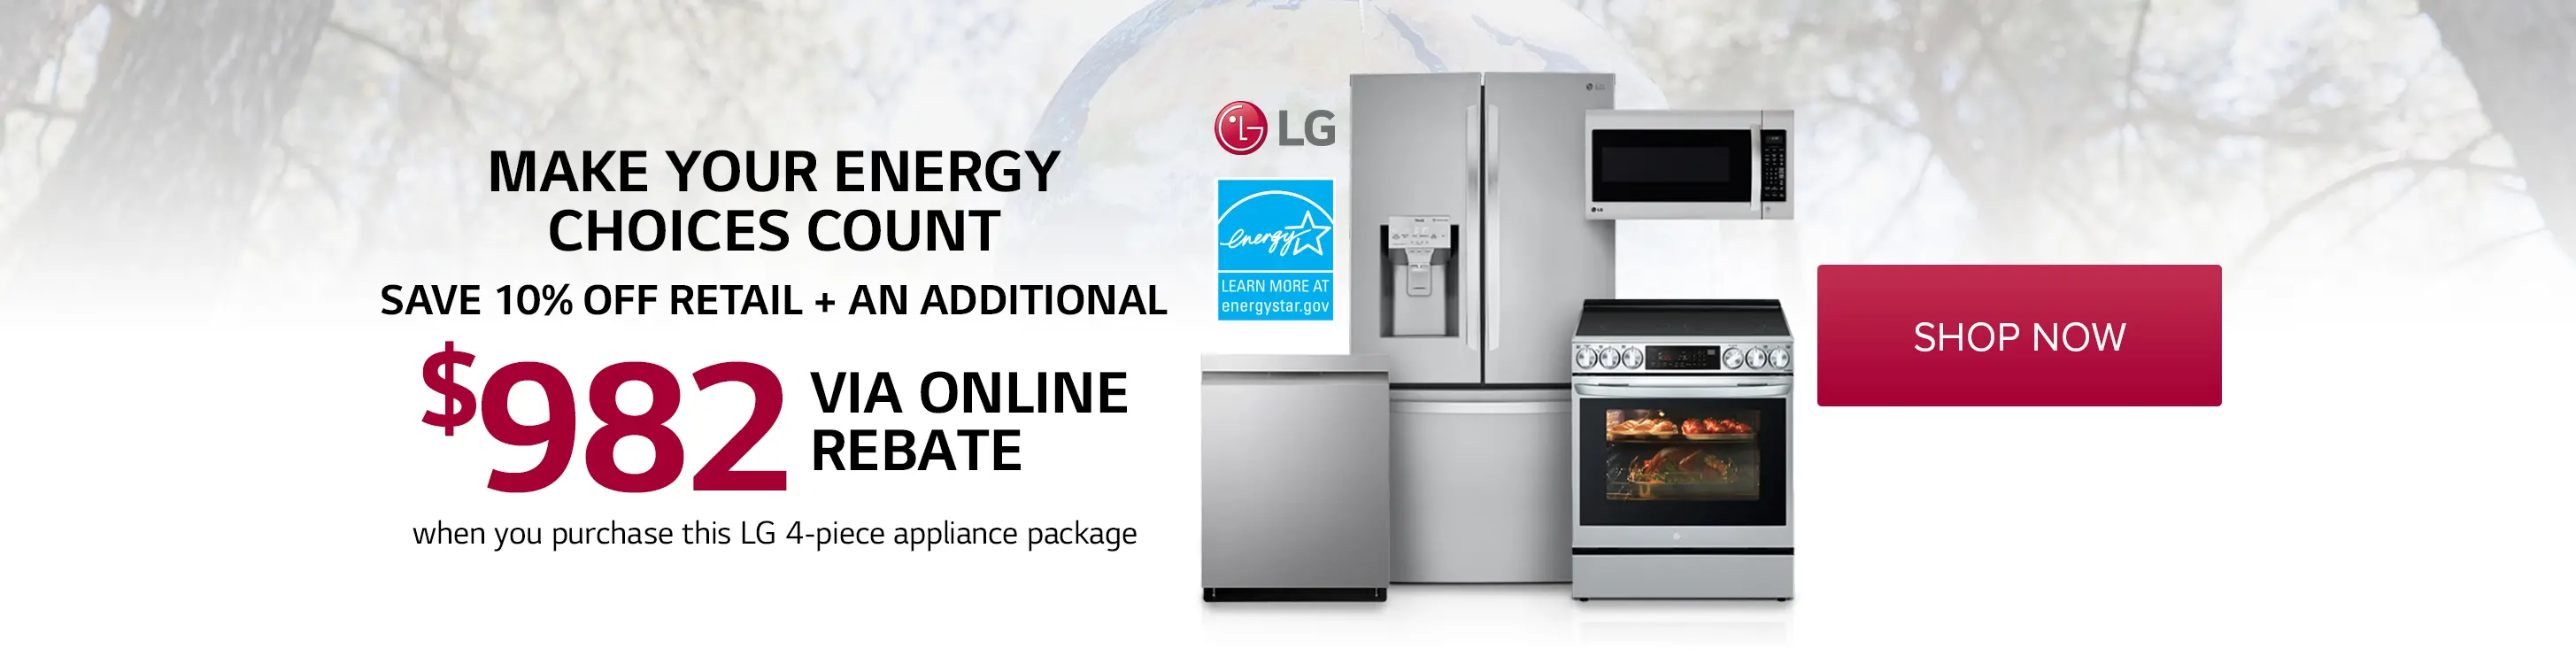 Save 10% off Retail plus an Additional $982 via an Online Rebate when you purchase this LG 4 piece Appliance Package